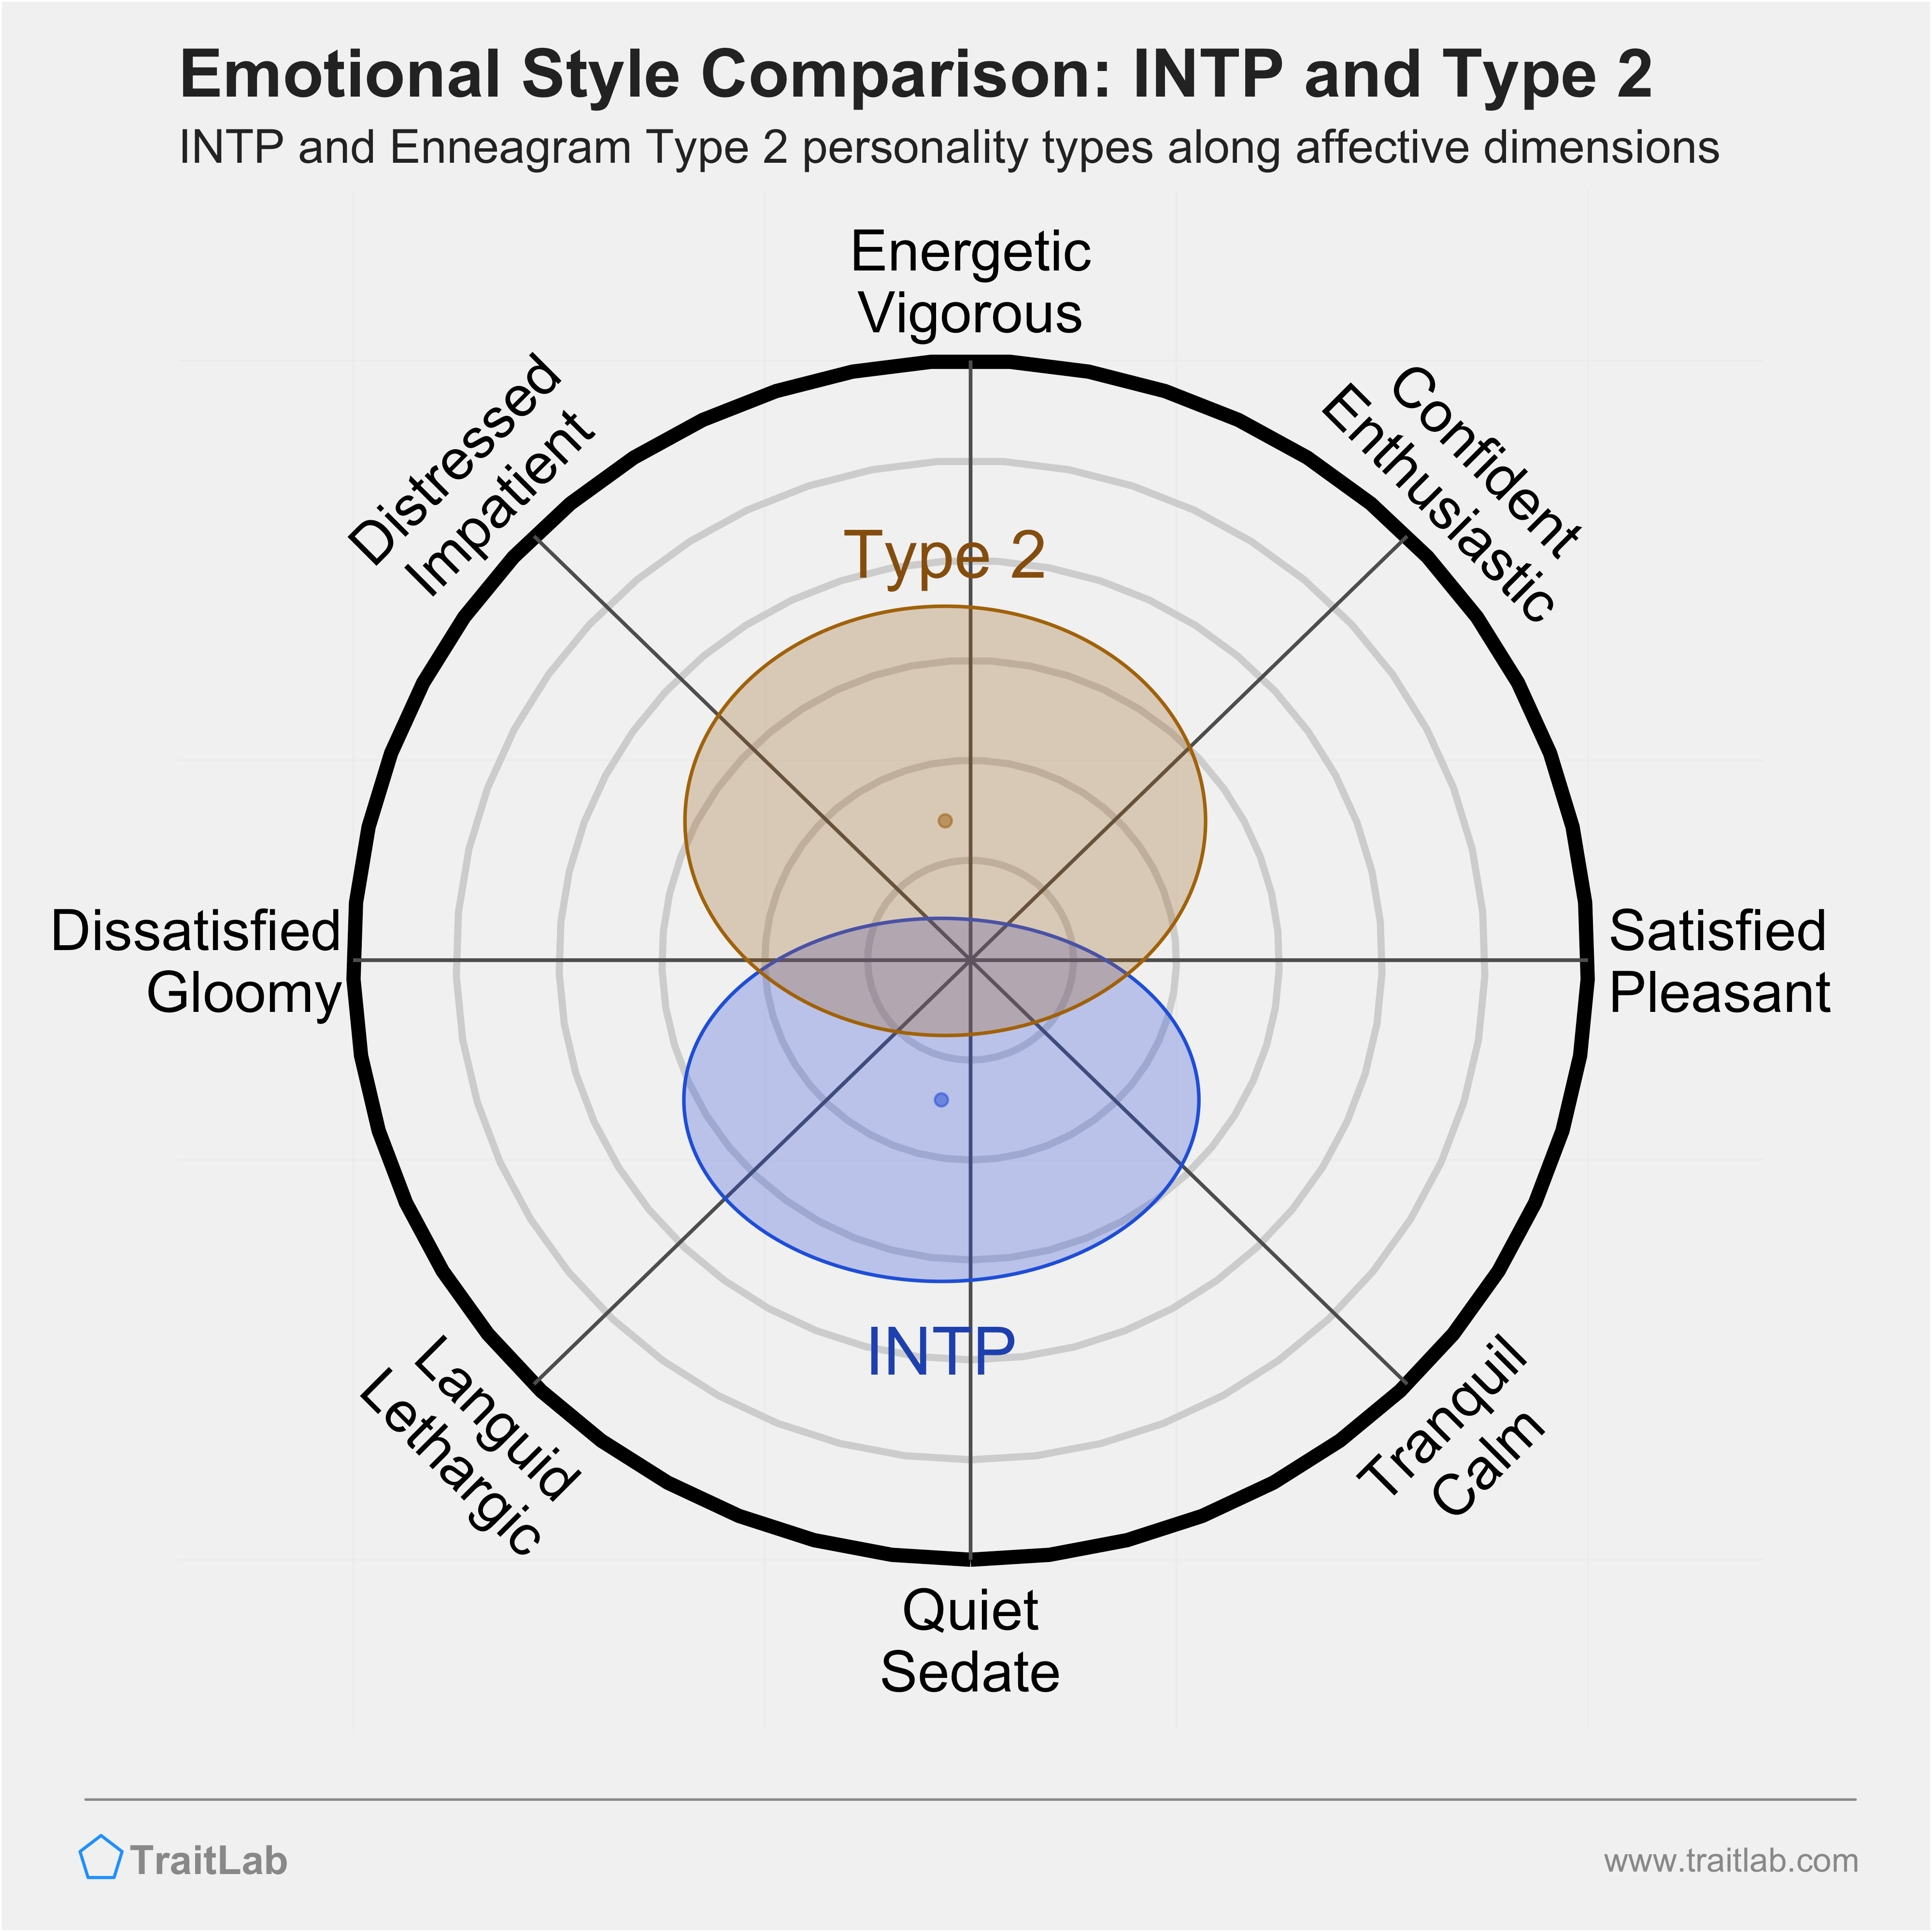 INTP and Type 2 comparison across emotional (affective) dimensions